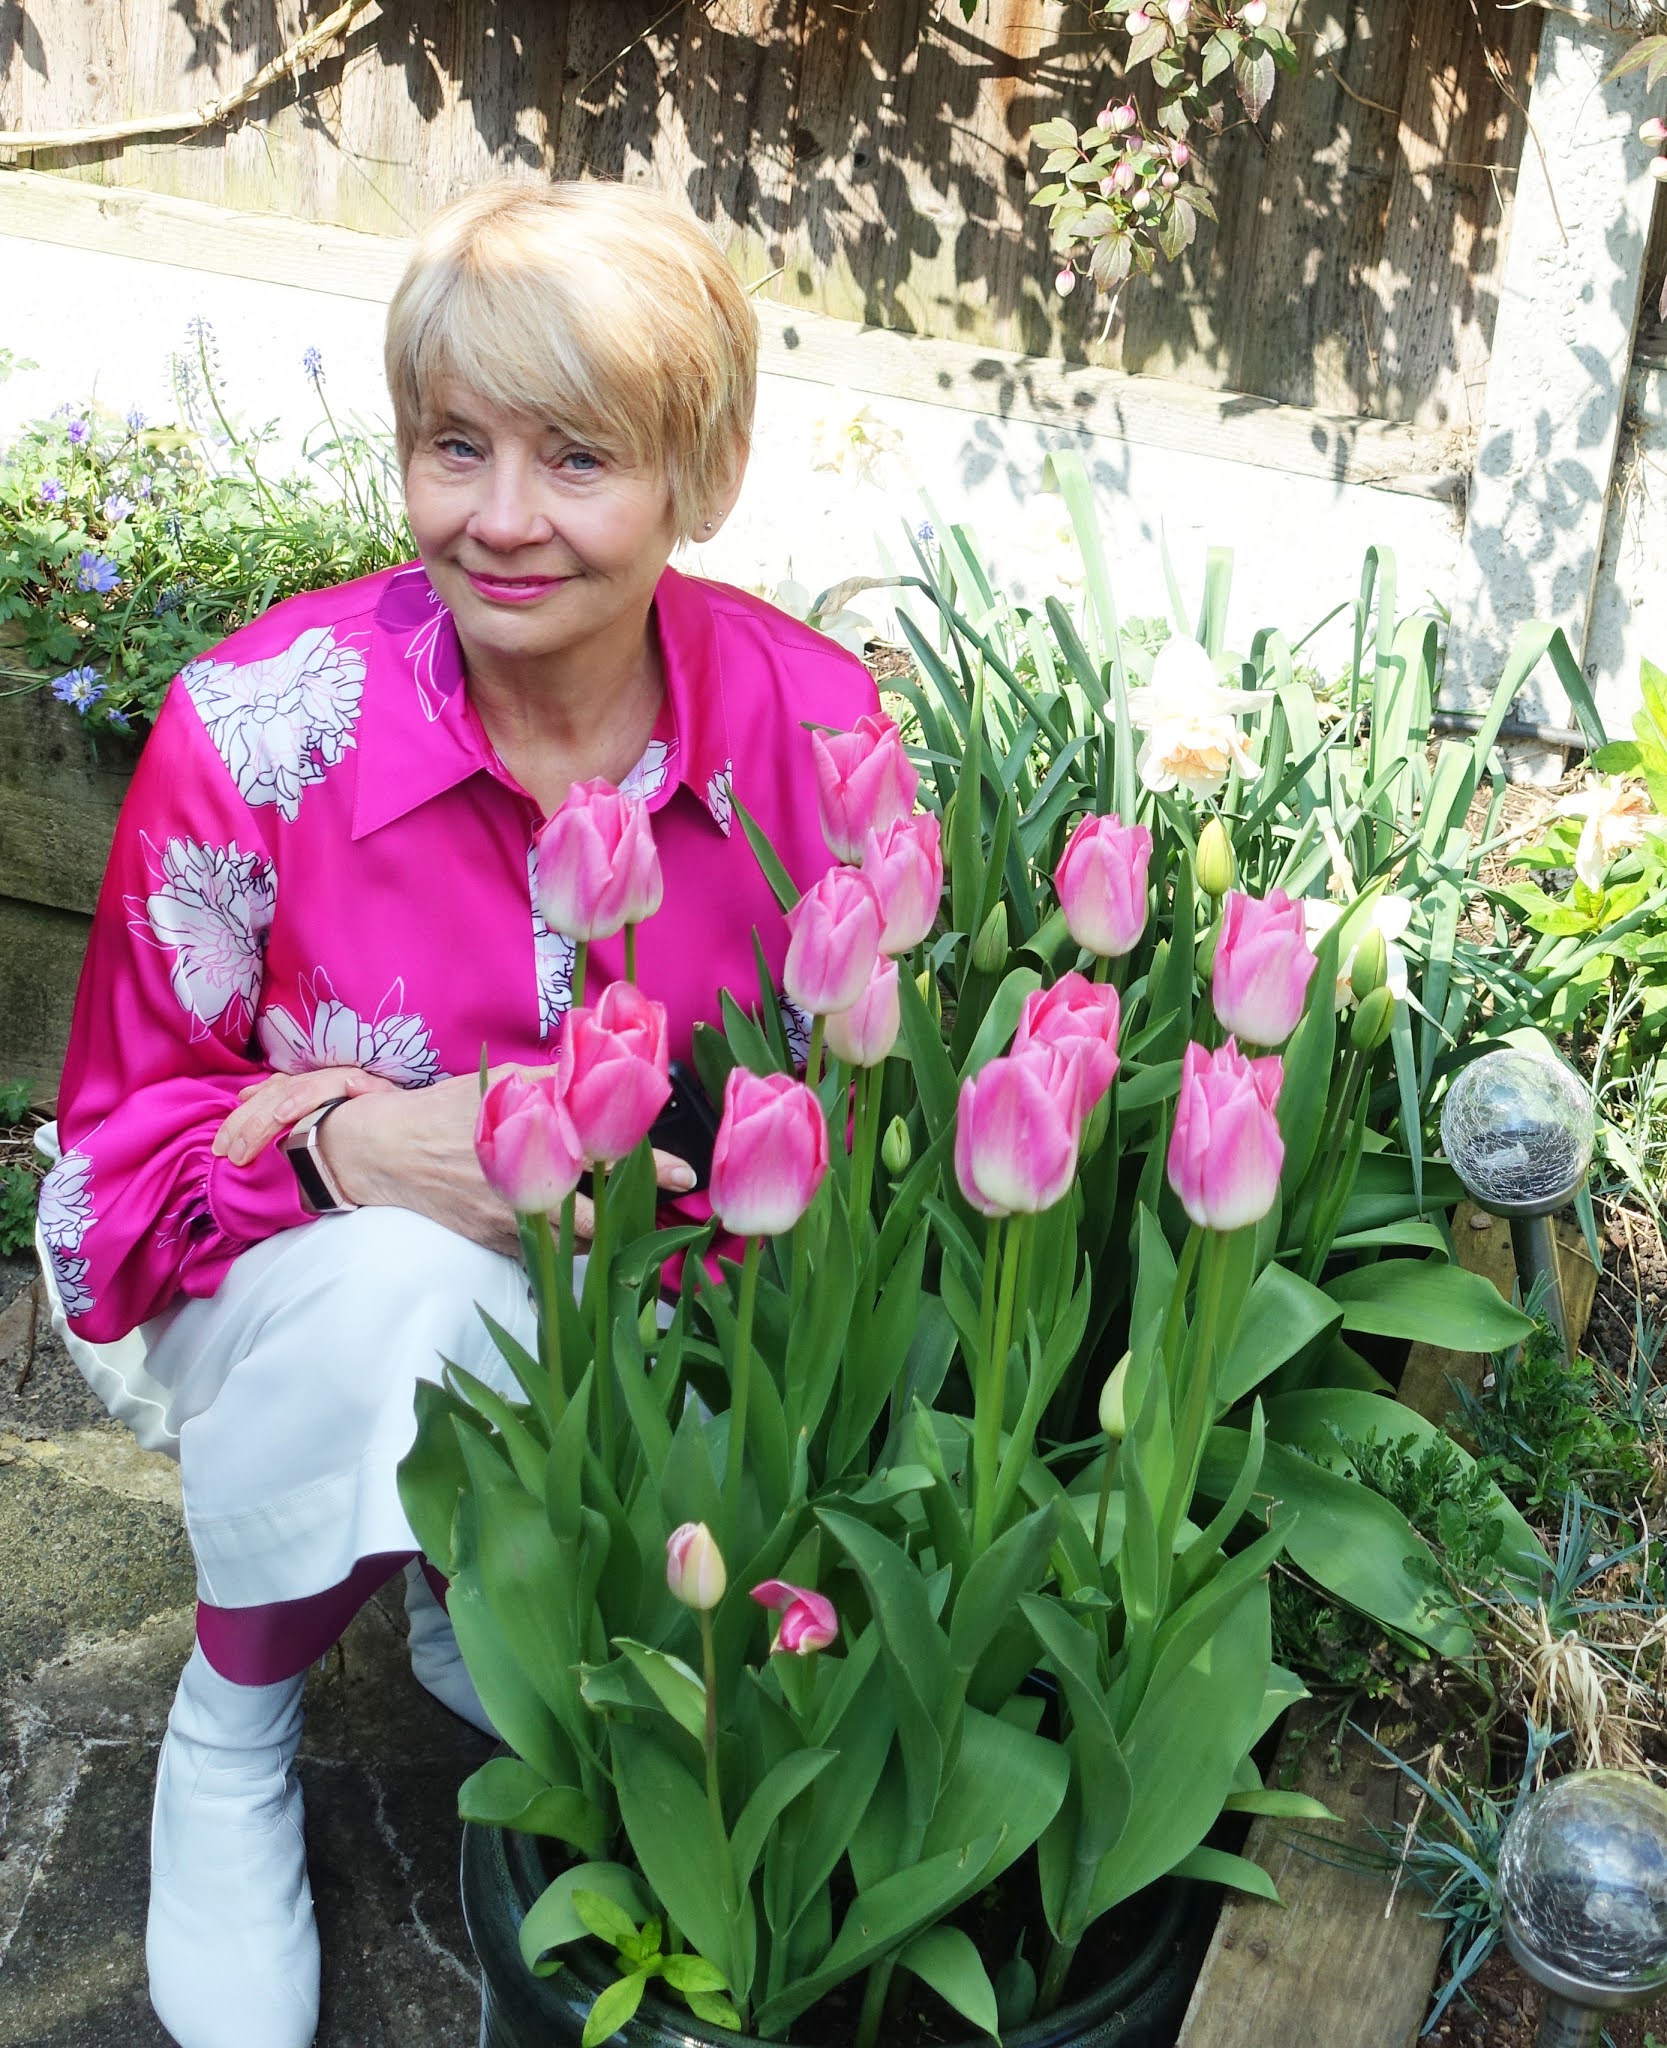 Posing in pink next to the pink tulips Dynasty: Is This Mutton blogger Gail Hanlon